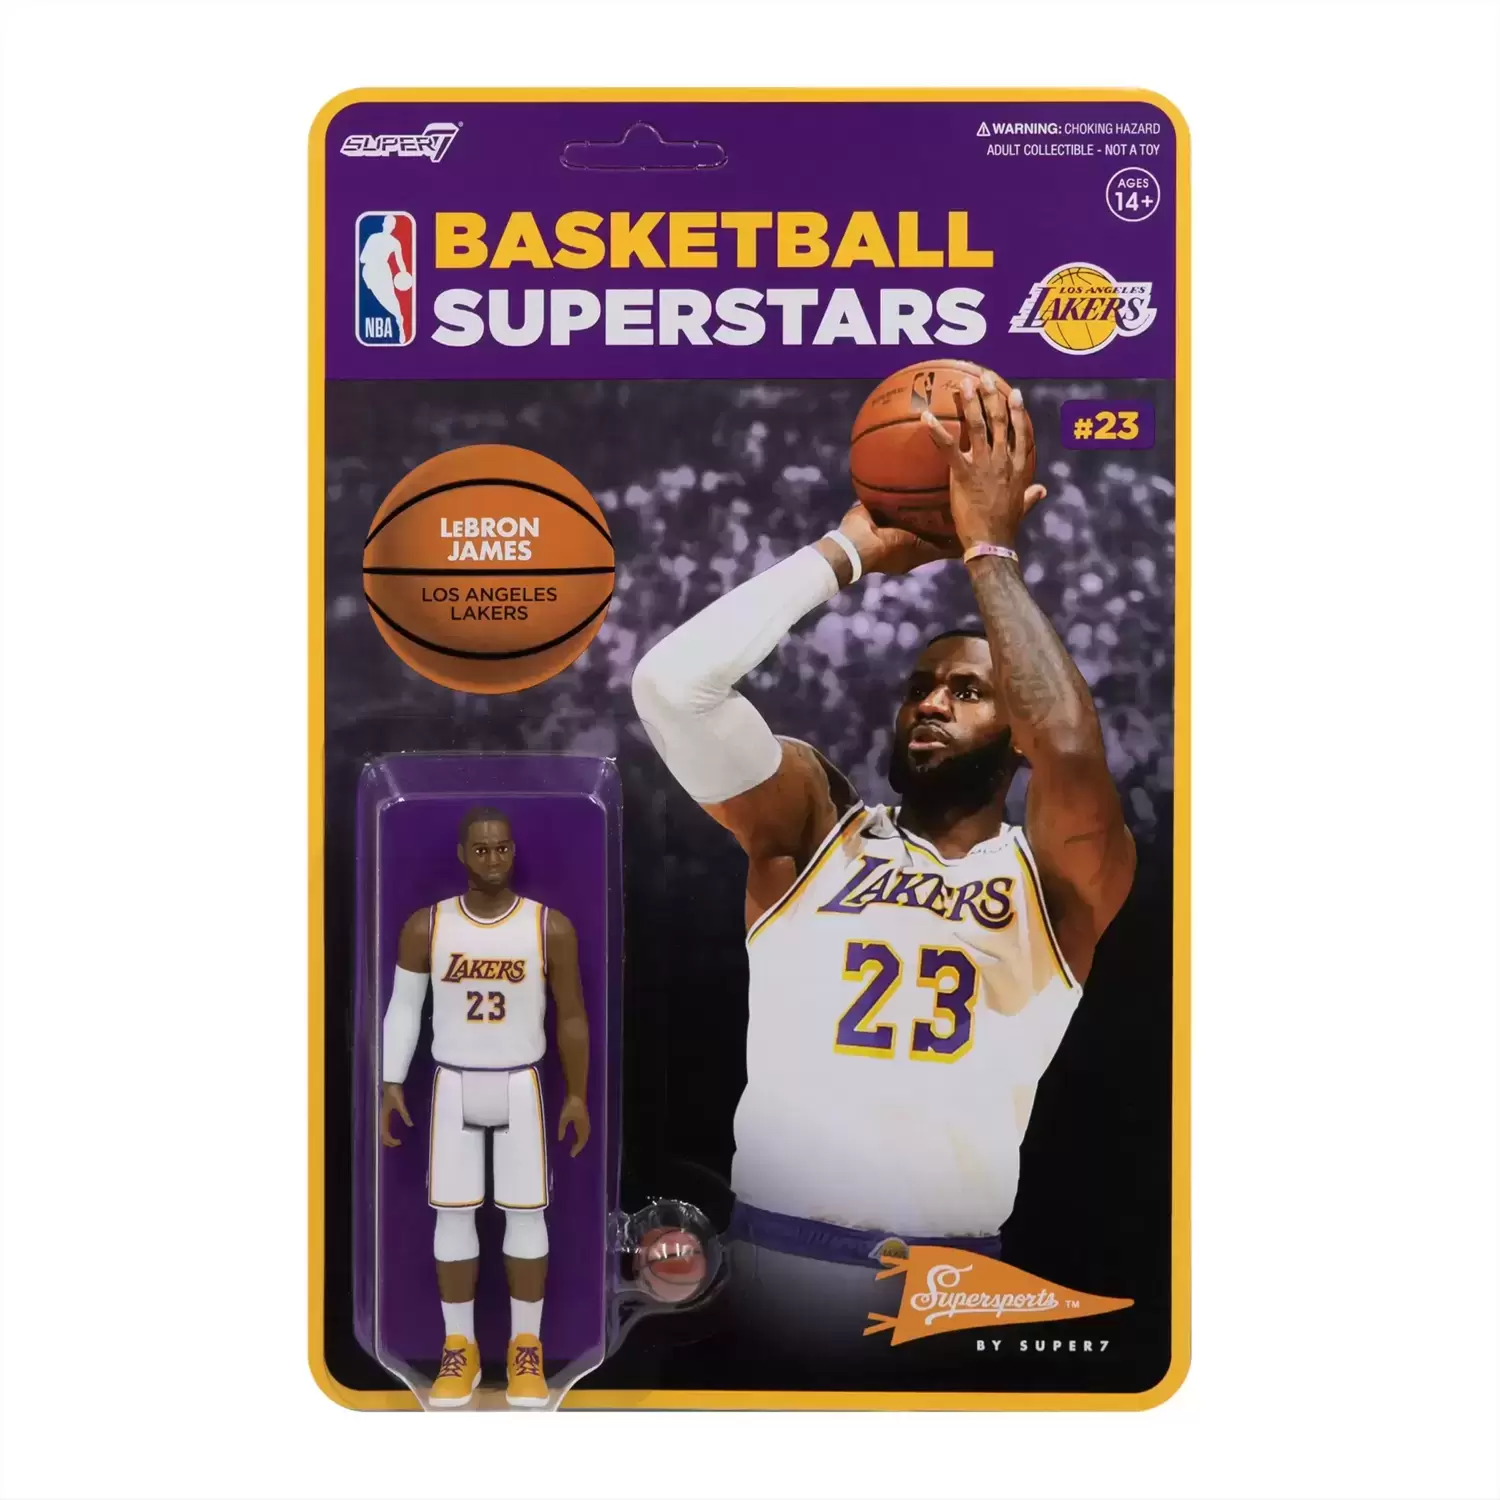 Supersports by Super7 - Basketball - LeBron James Alternate Jersey (Lakers)